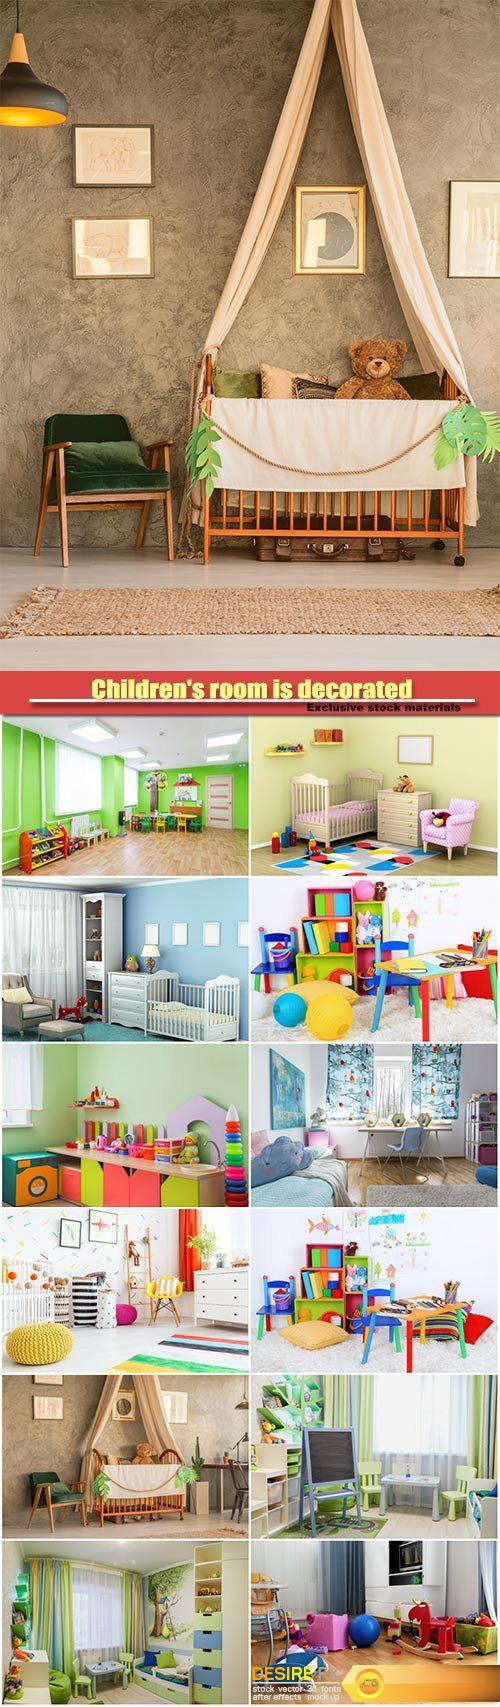 Children's room is decorated